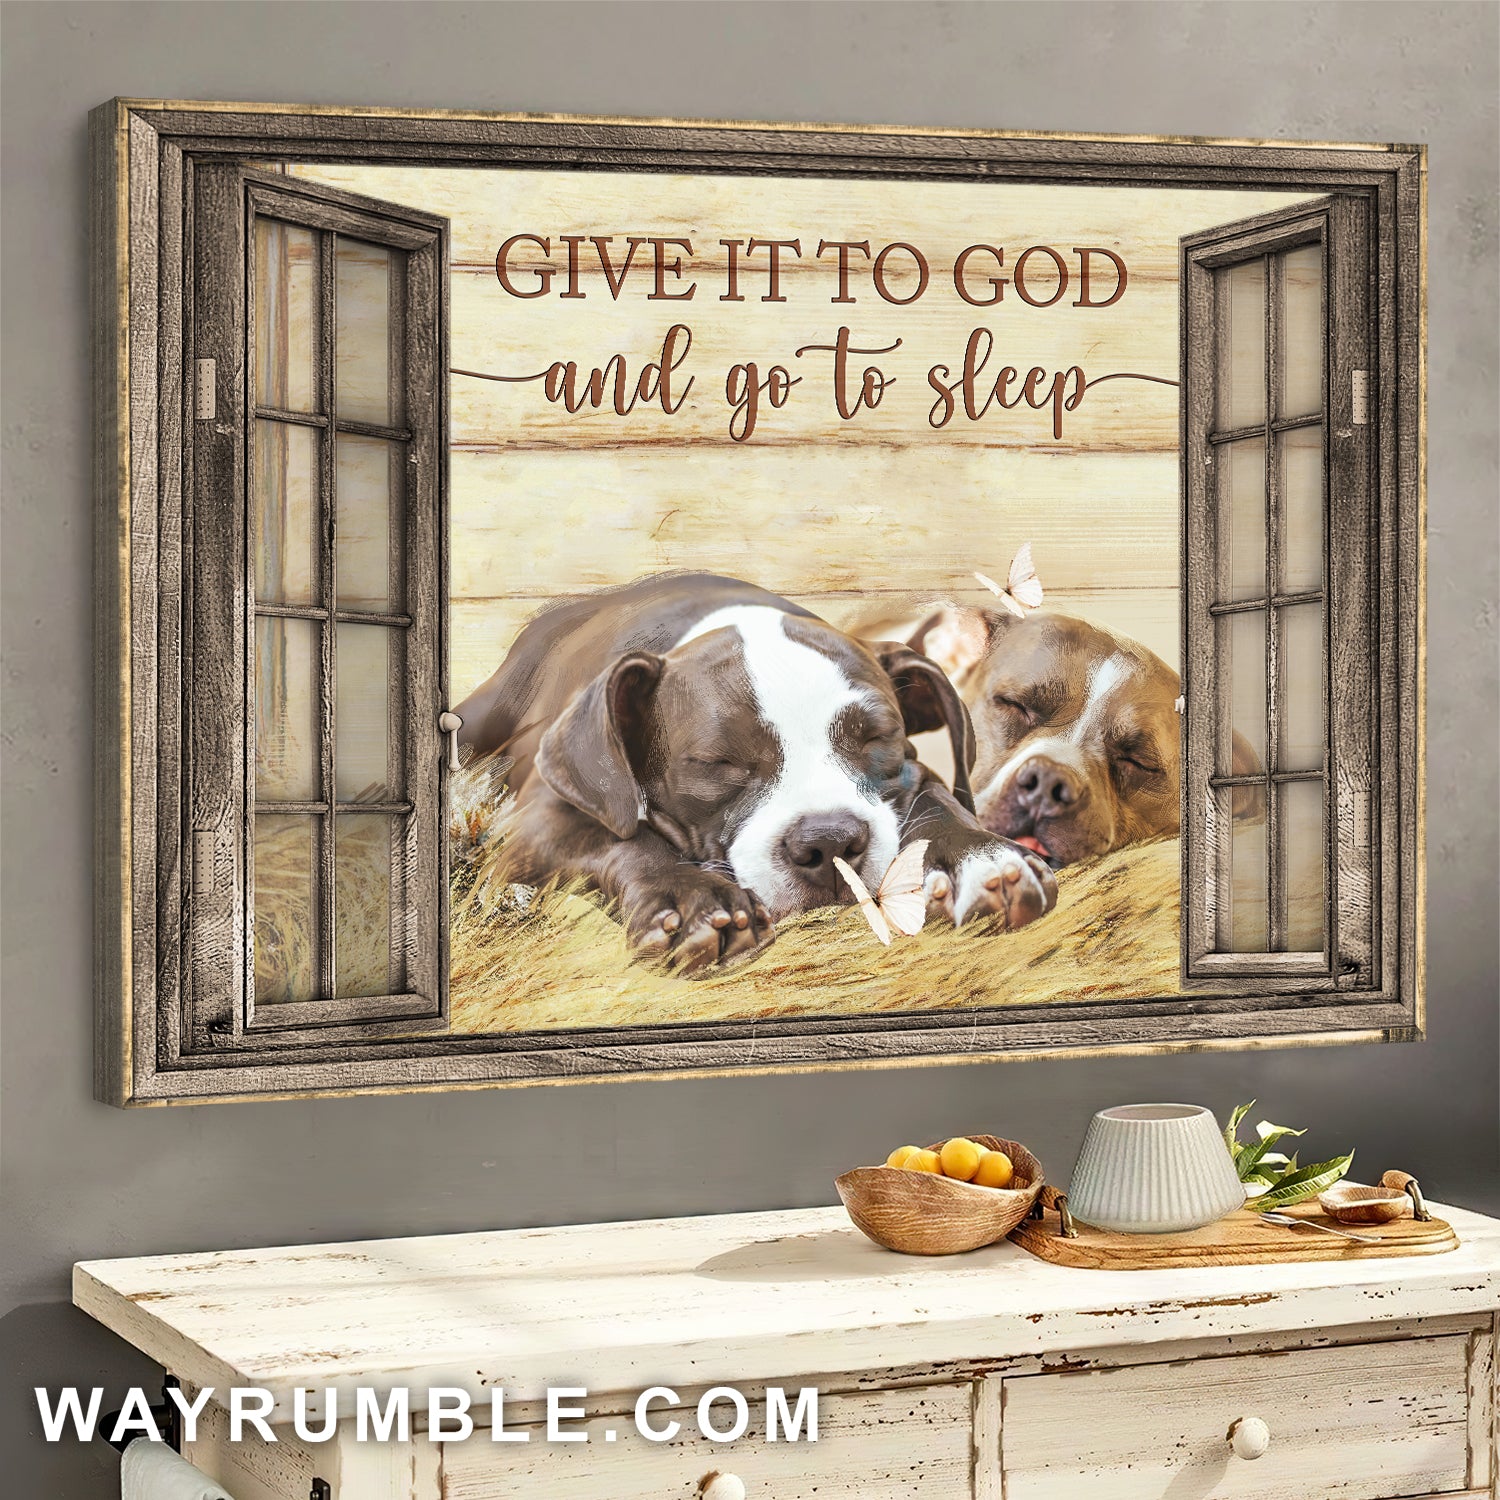 Sleeping Pitbull, Window, Give it to God and go to sleep - Pit bull Landscape Canvas Prints, Wall Art